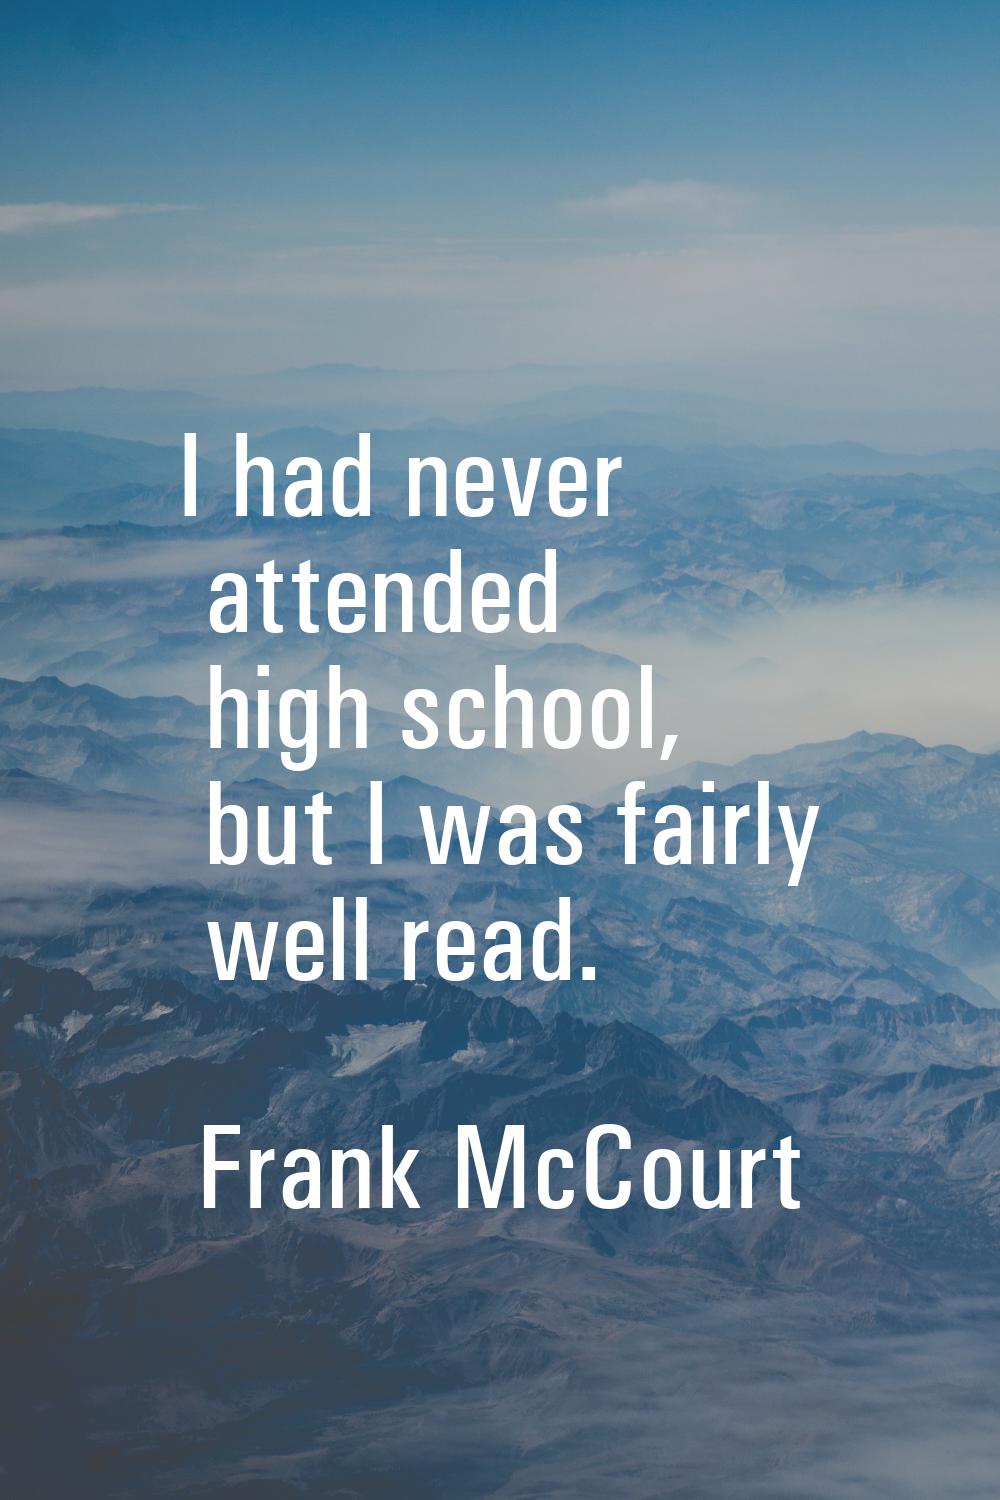 I had never attended high school, but I was fairly well read.